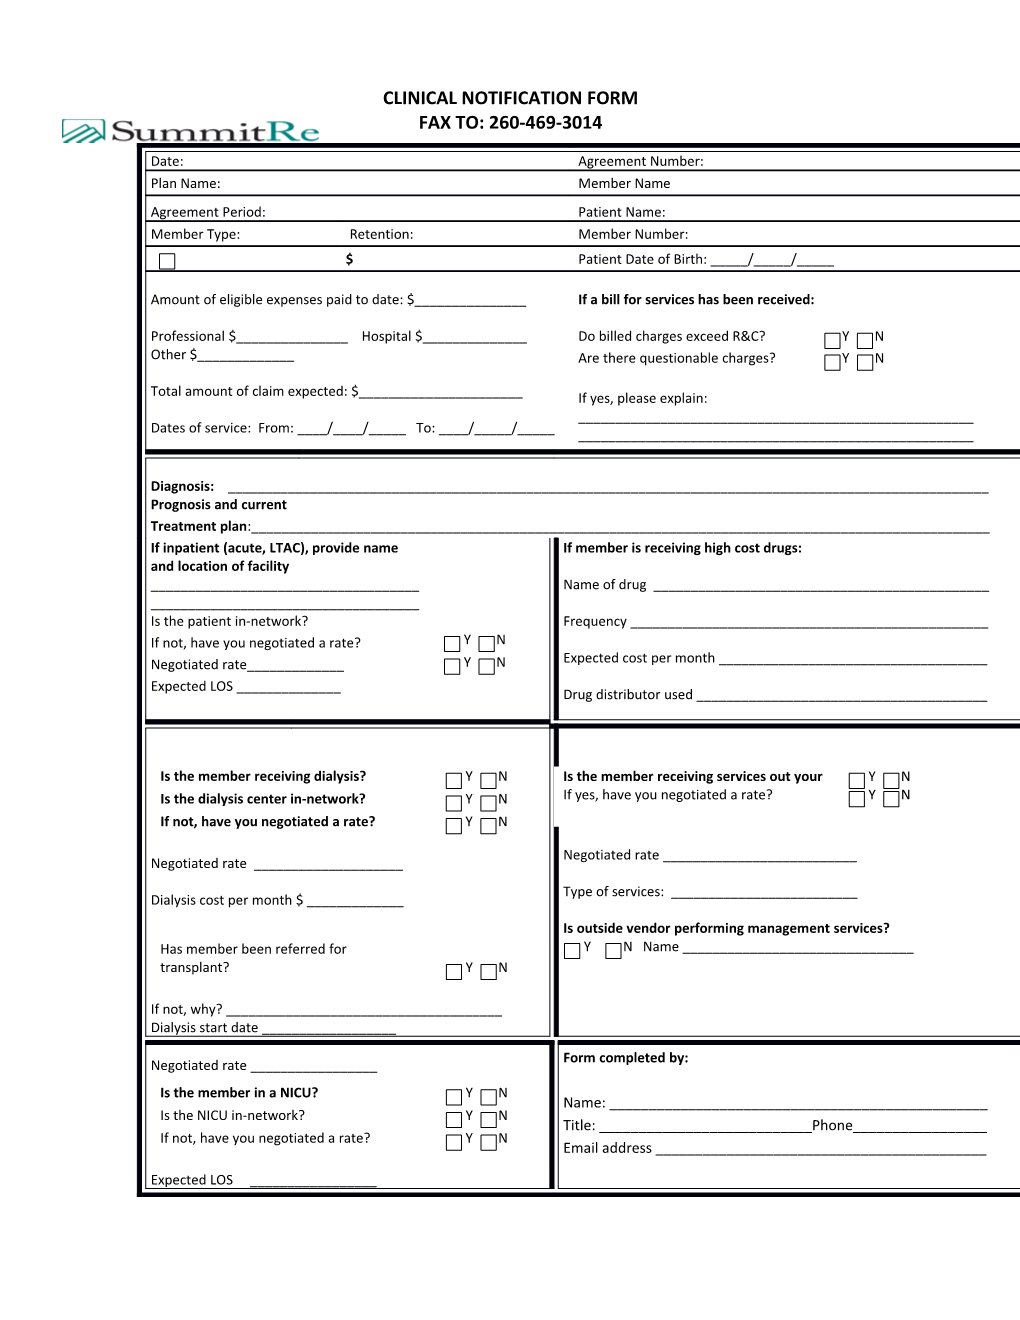 Clinical Notification Form